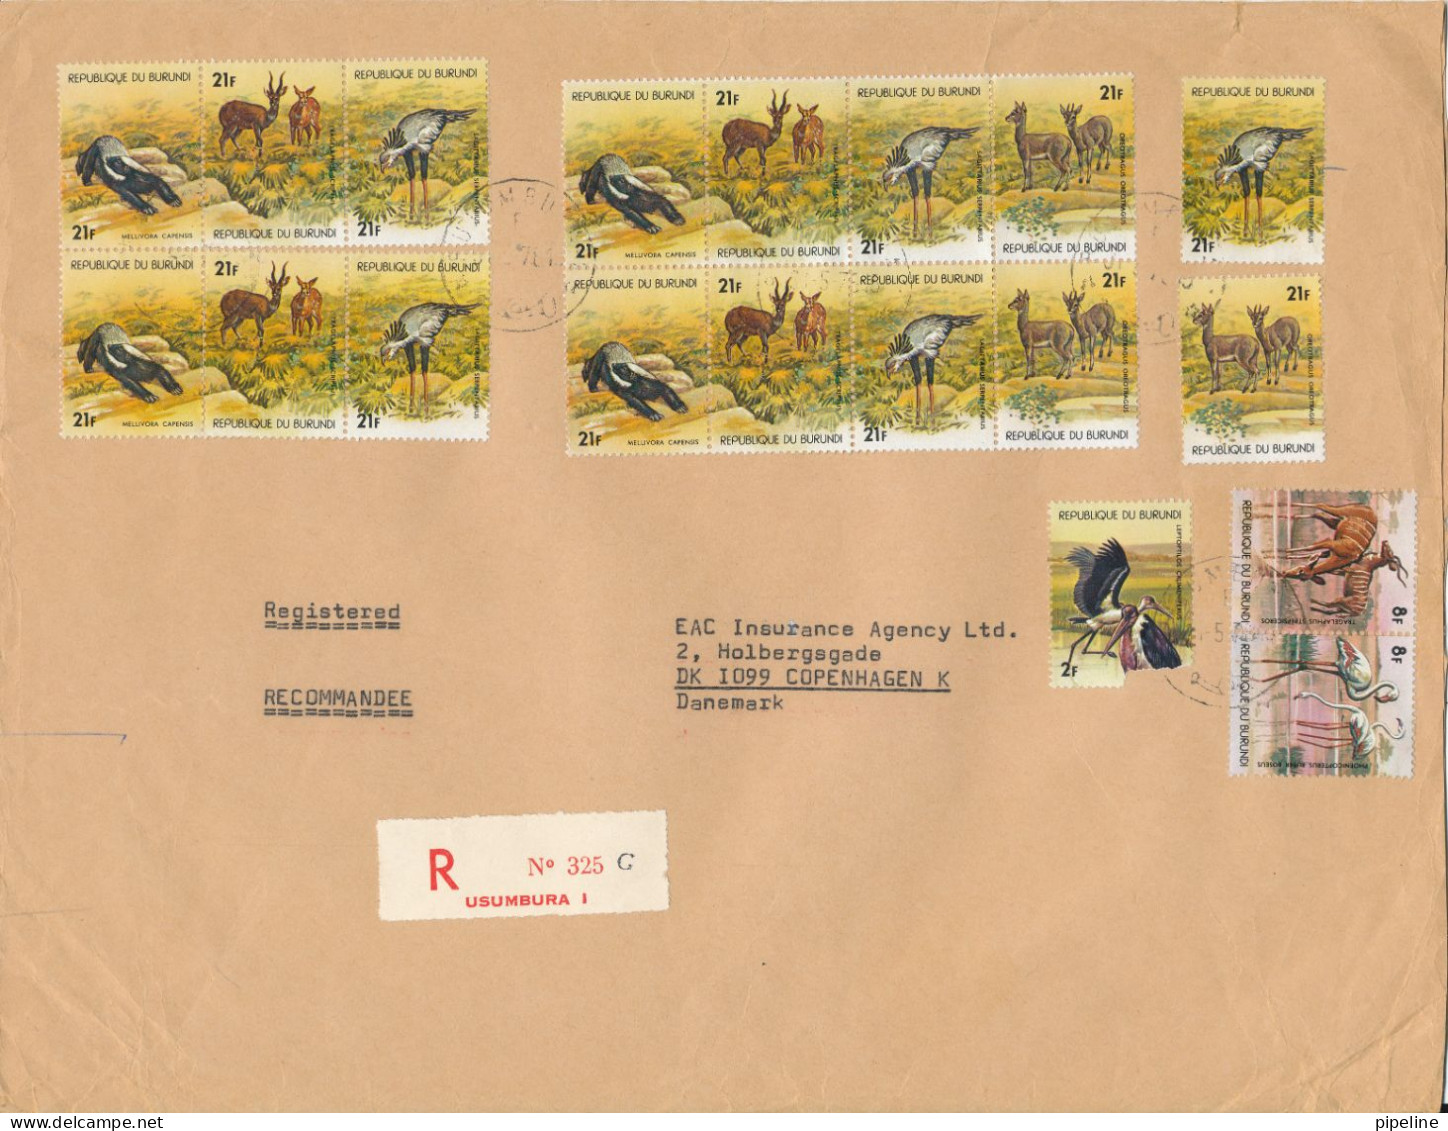 Burundi Registered Cover Sent To Denmark 31-5-1978 With A Lot Of Topic Stamps Big Size Cover - Lettres & Documents